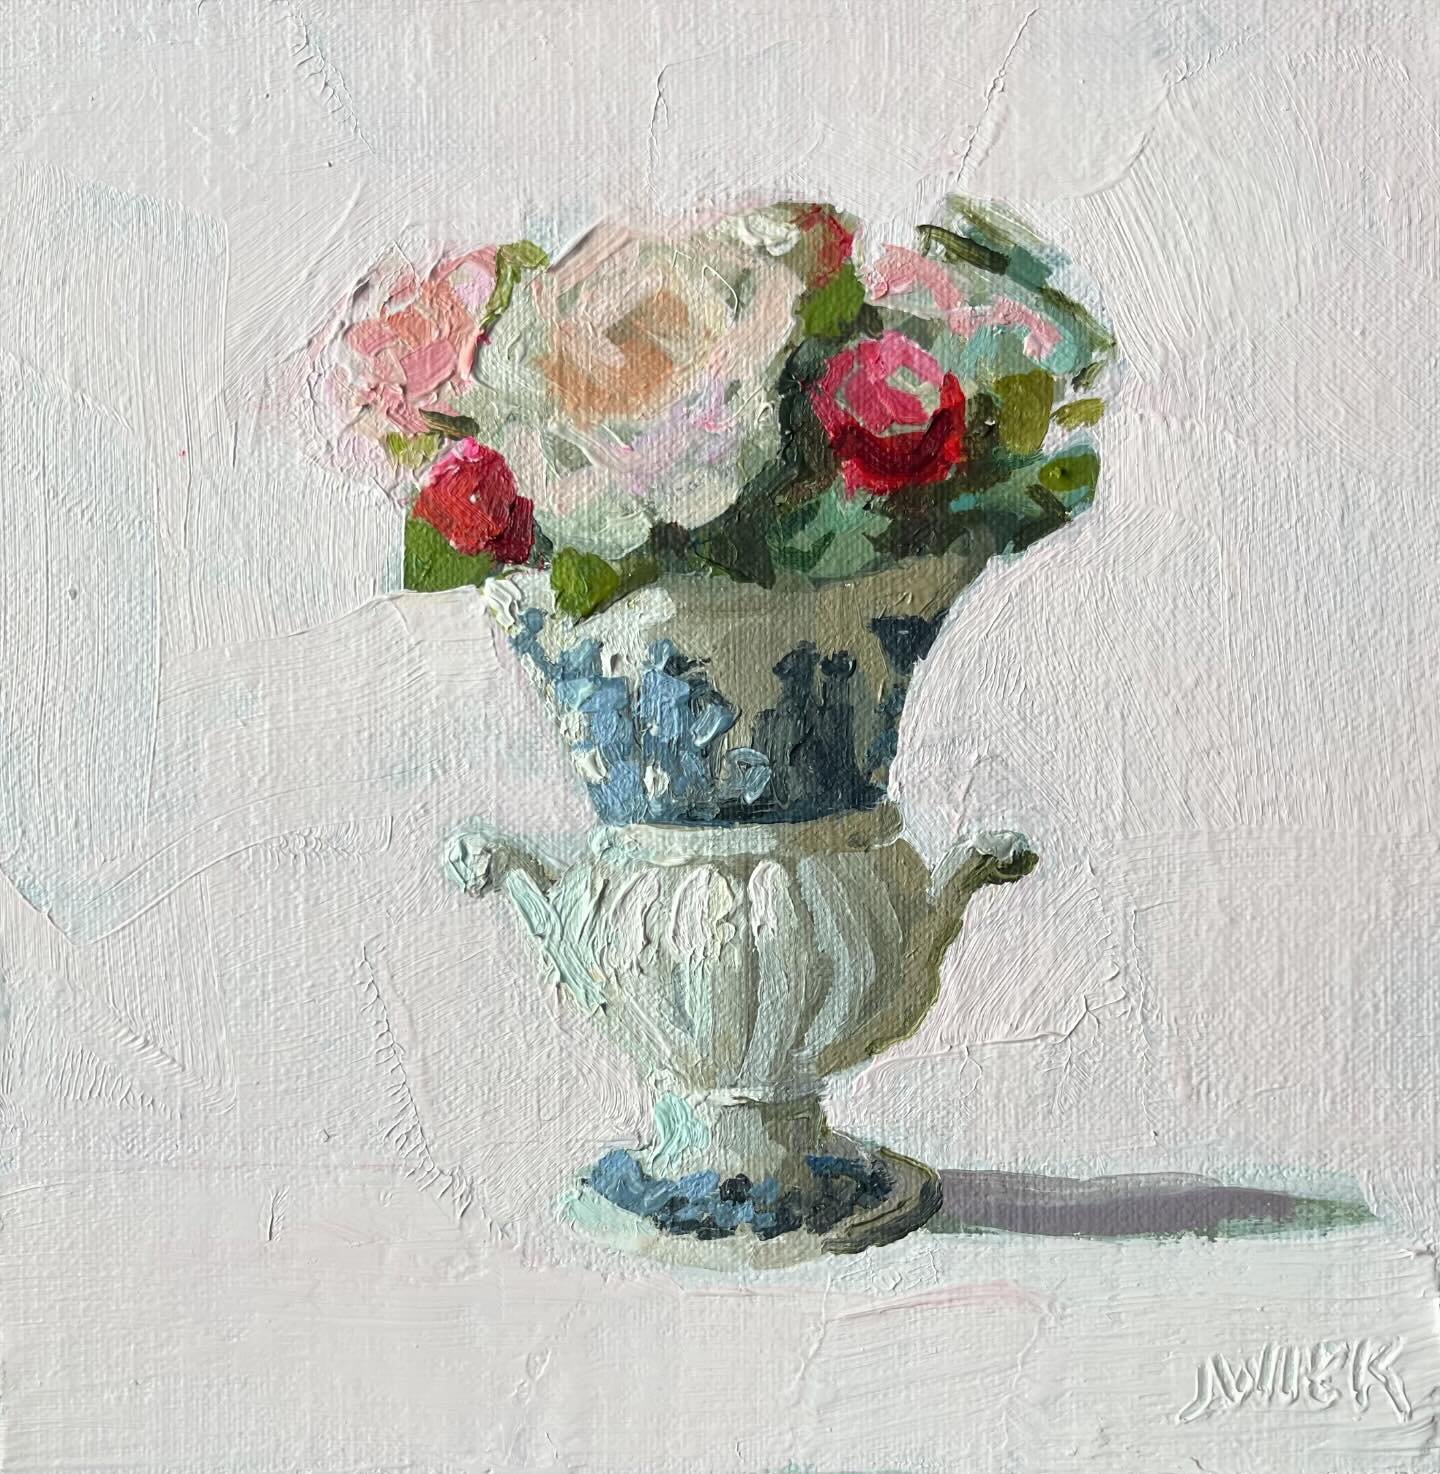 🌸🩵🌸 Happy May Day!  And Wedgwood Wednesday!  And Mother&rsquo;s Day just around the corner!  This 8&rdquo; x 8&rdquo; oil on linen is framed and available.  Will post a framed pic in stories shortly.

I love these little Wedgwood urns.  If you&rsq